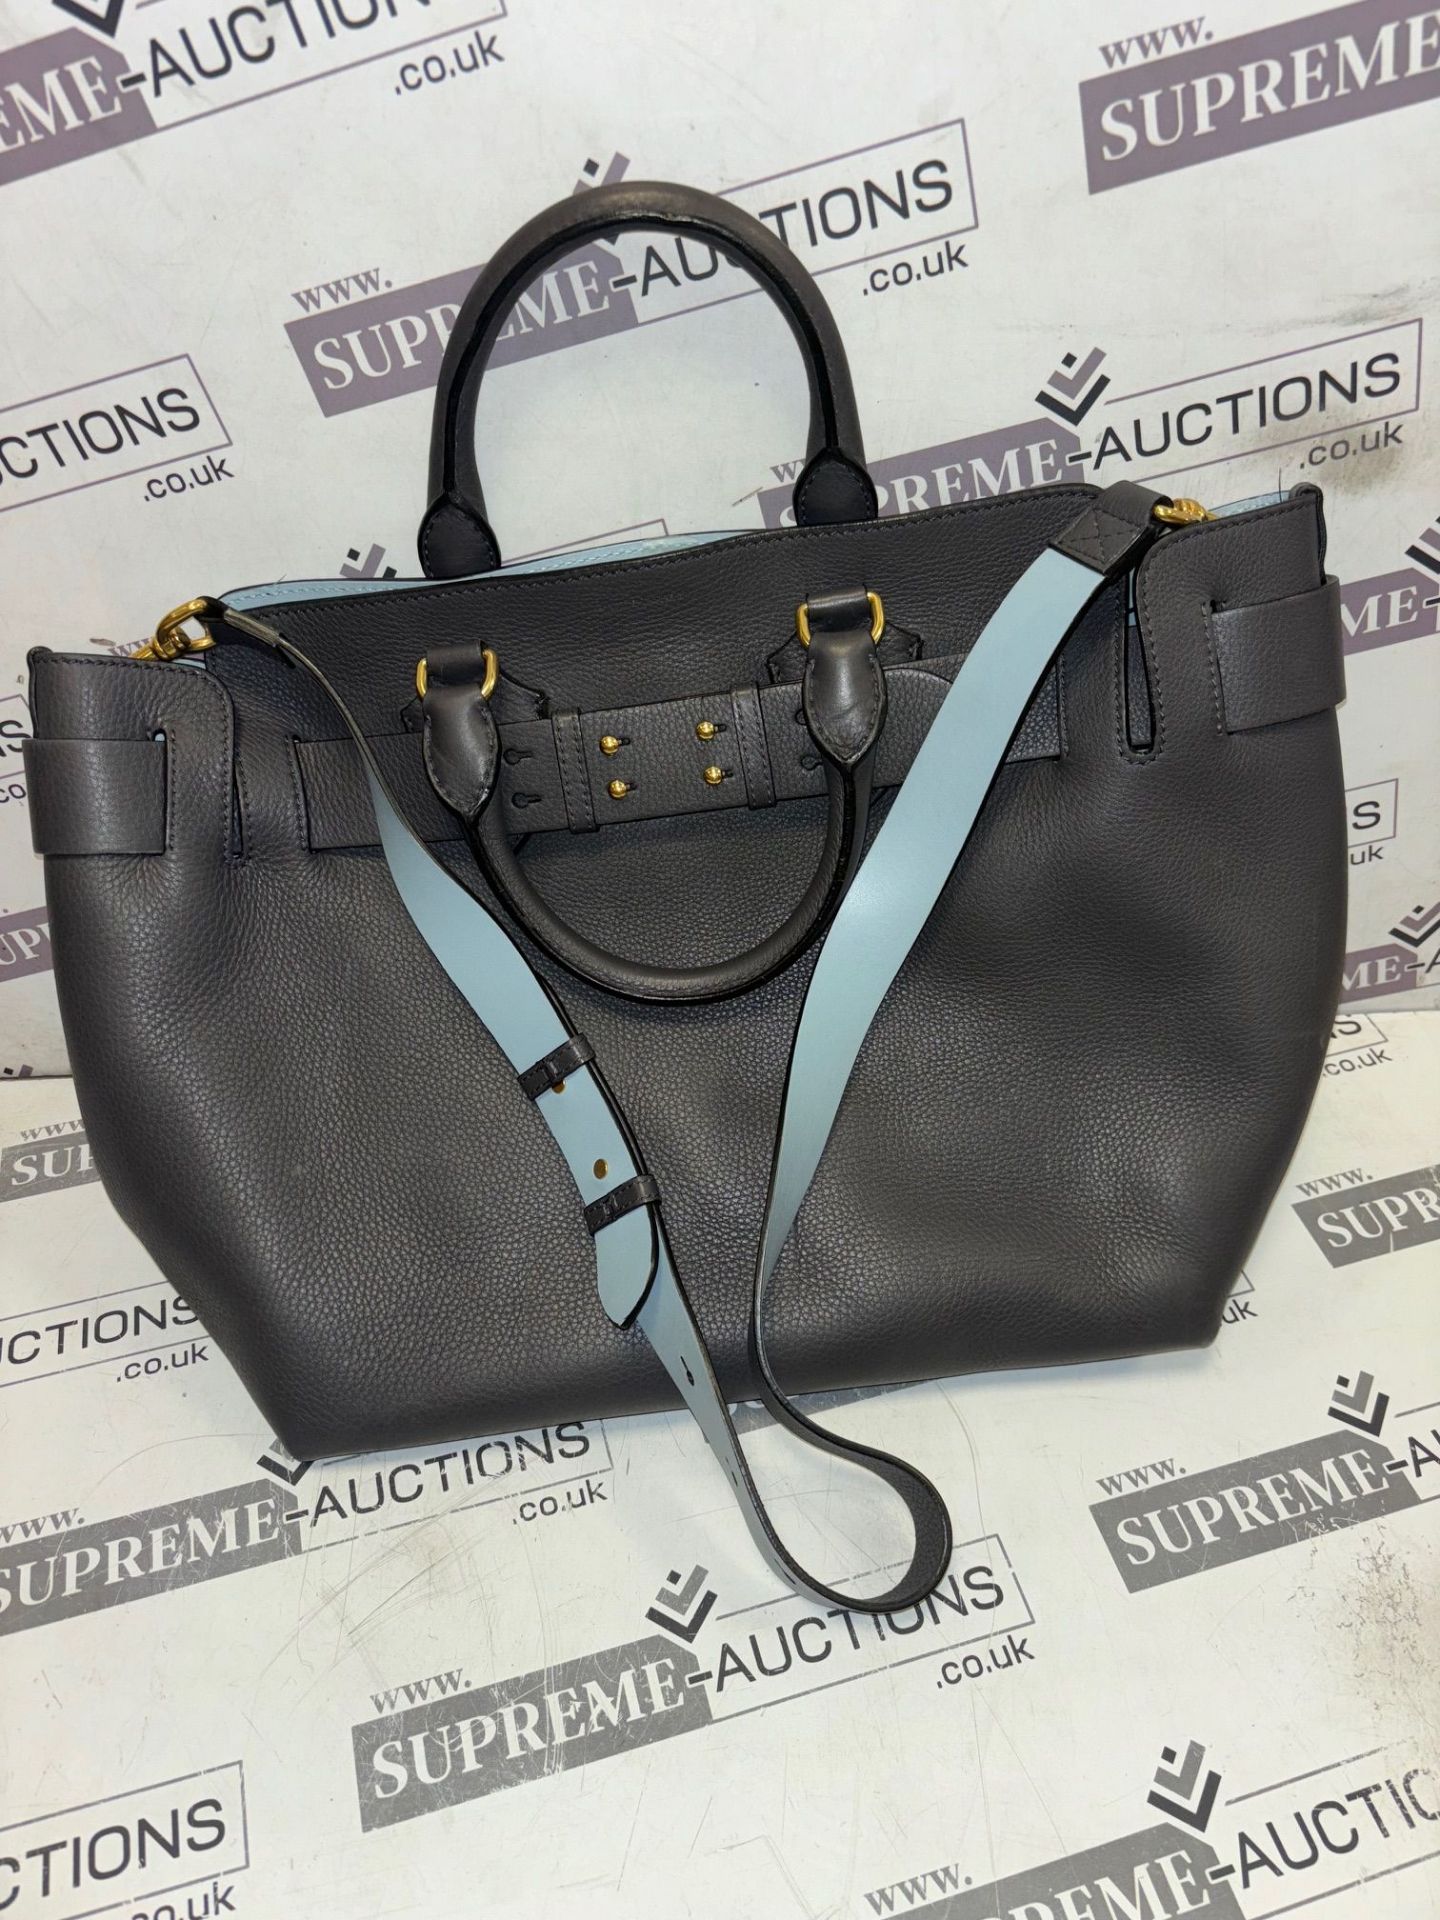 Genuine Burberry The Medium leather Belt Bag. Charcoal grey and baby blue. - Image 5 of 13